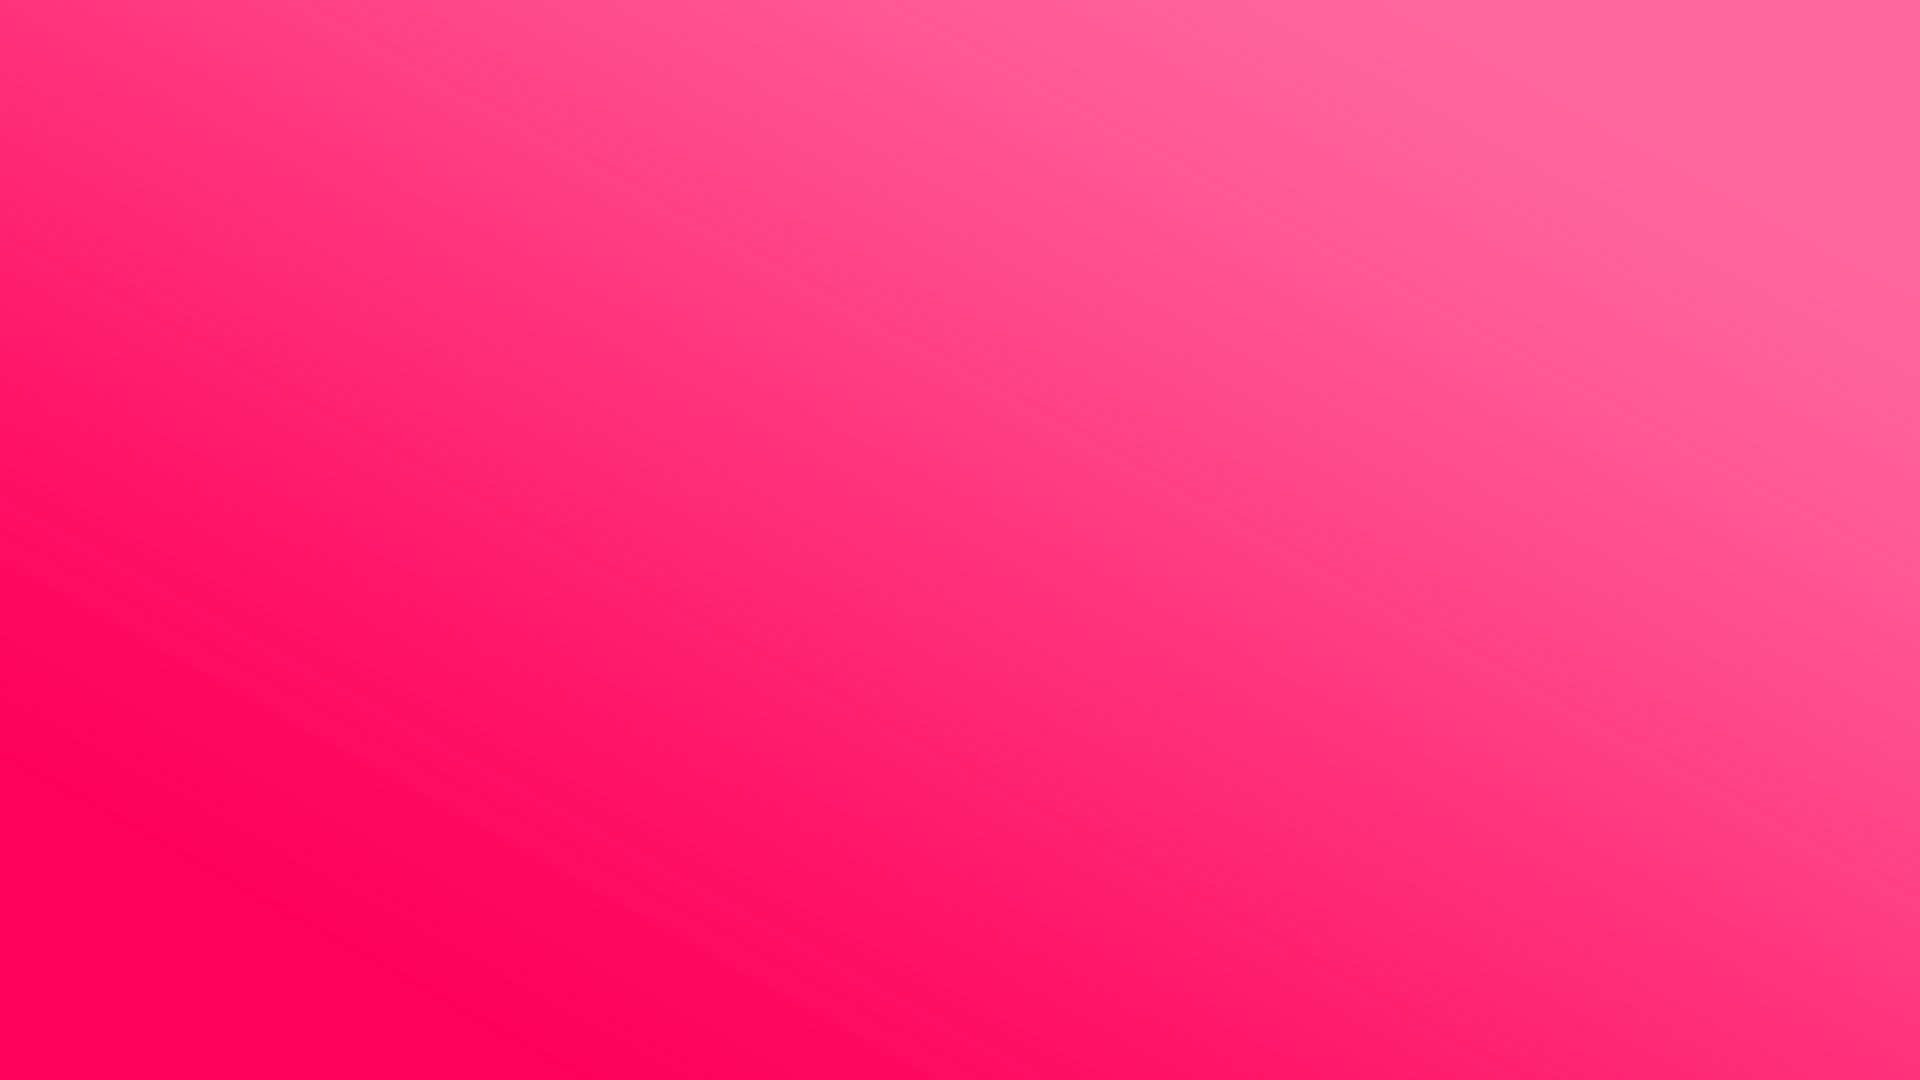 1920x1080  Wallpaper pink, solid, color, light, bright